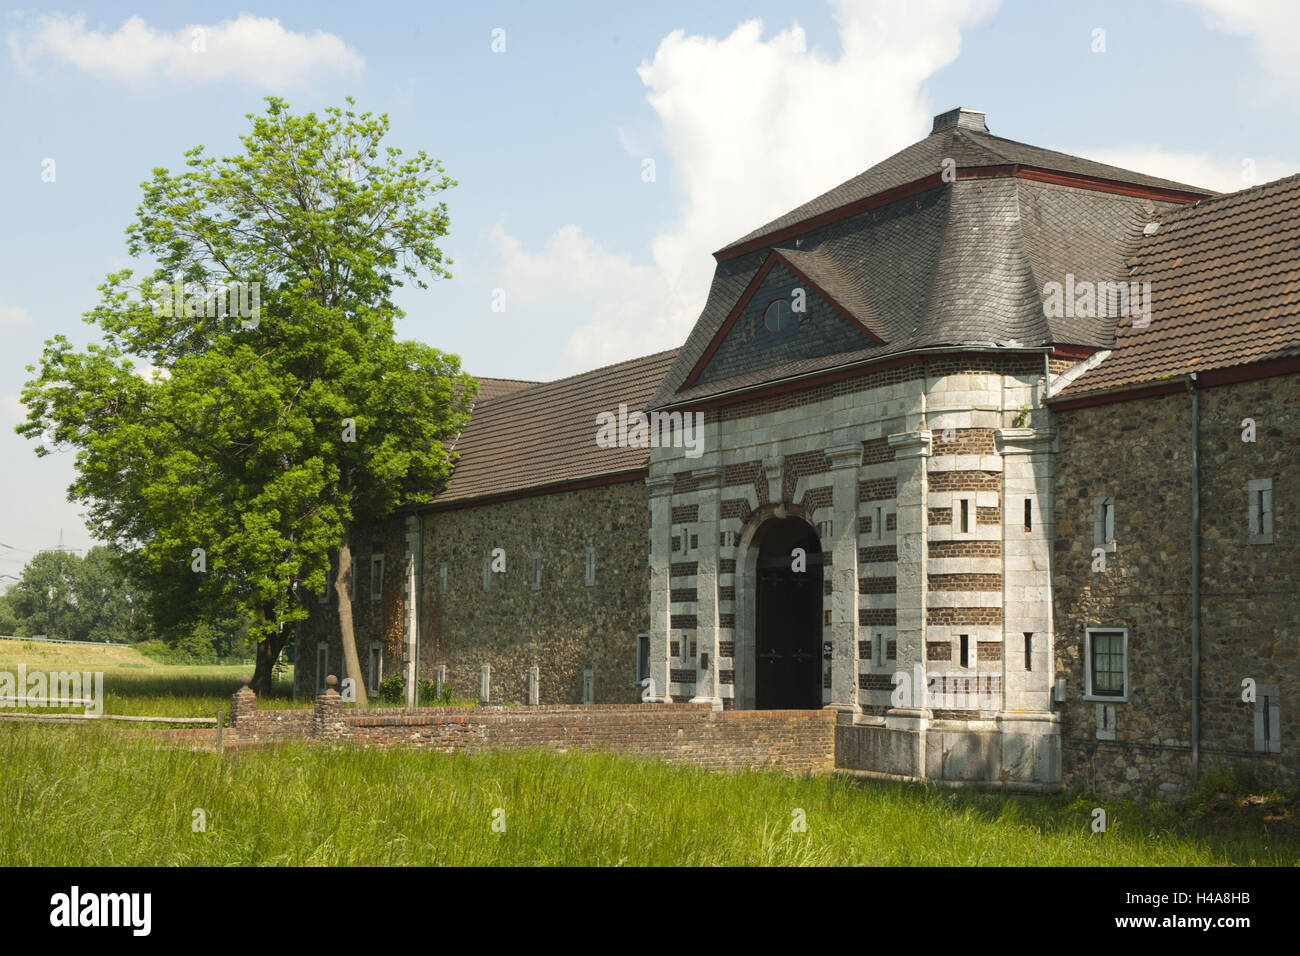 Germany, North Rhine-Westphalia, town region Aachen, Eschweiler, district Weisweiler, house Palant, north page the remained outer ward with goal construction, Stock Photo